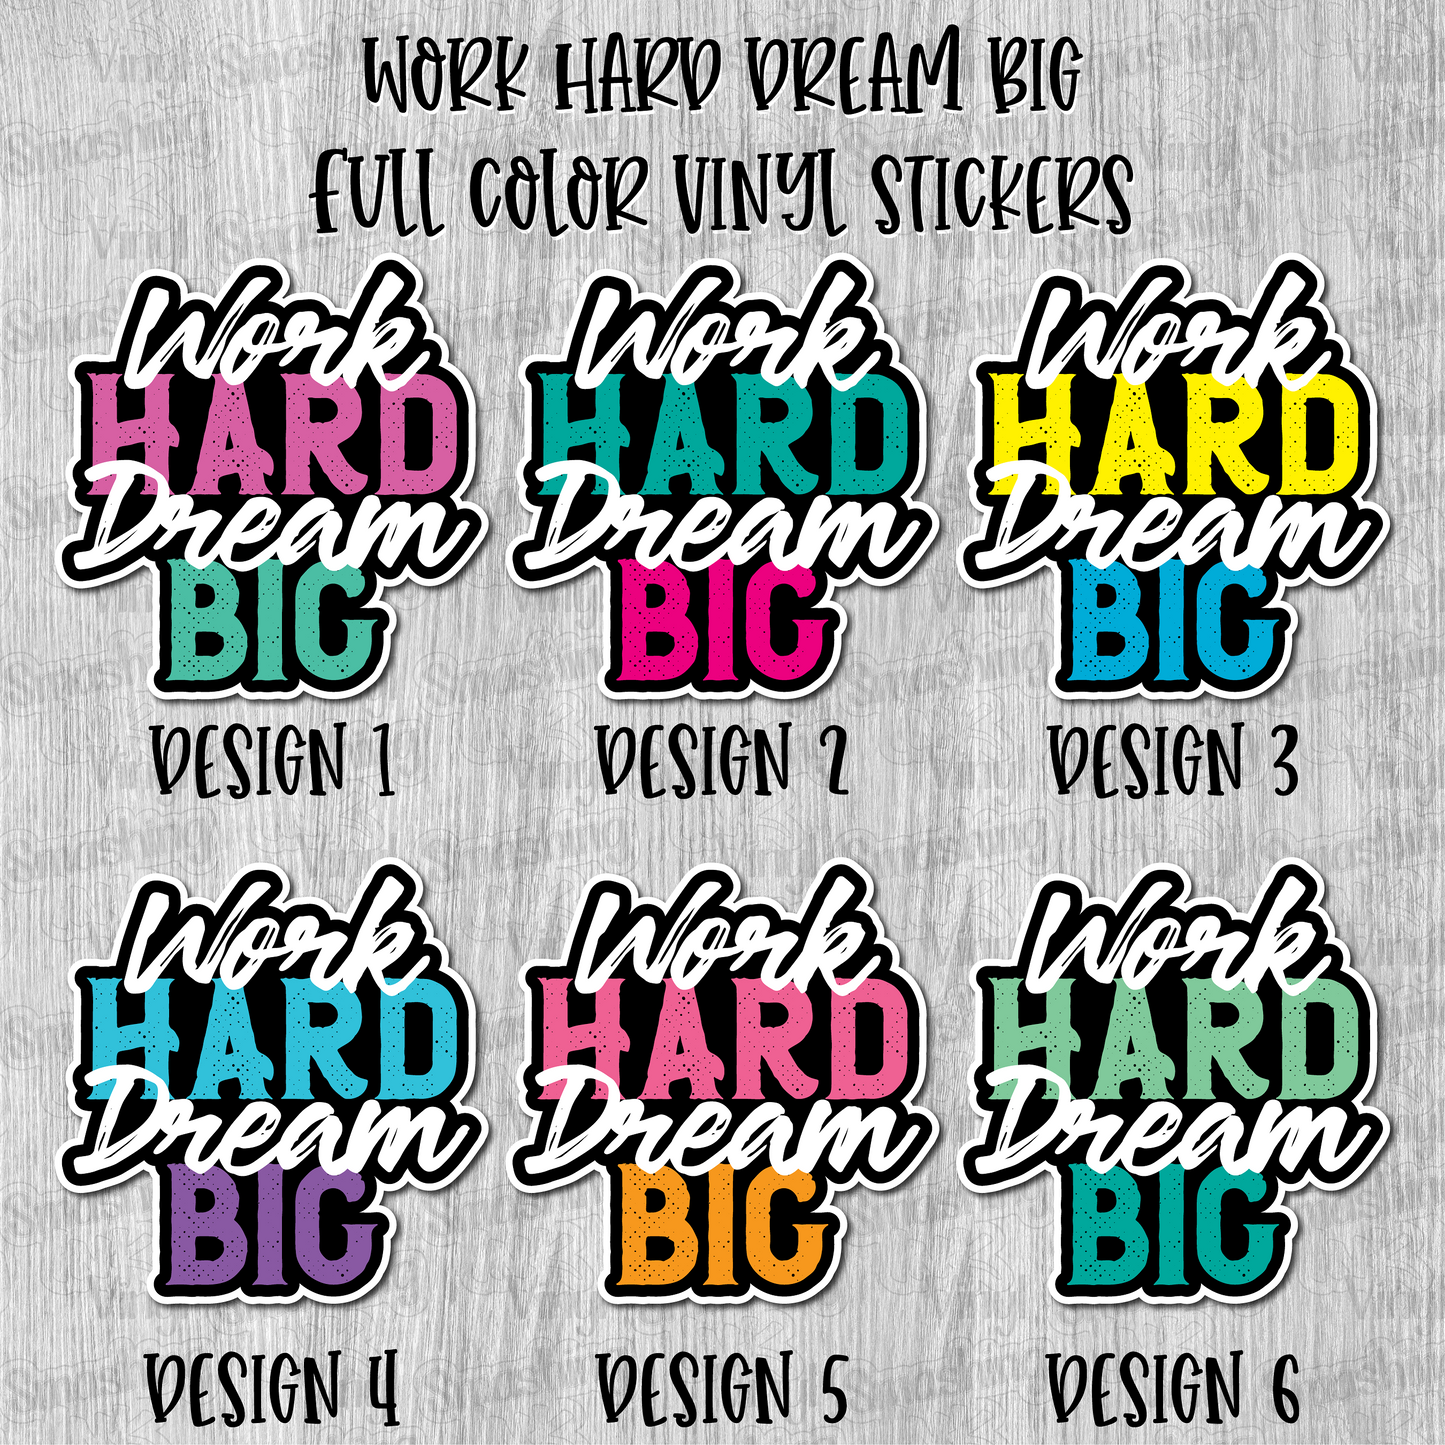 Work Hard Dream Big - Full Color Vinyl Stickers (SHIPS IN 3-7 BUS DAYS)